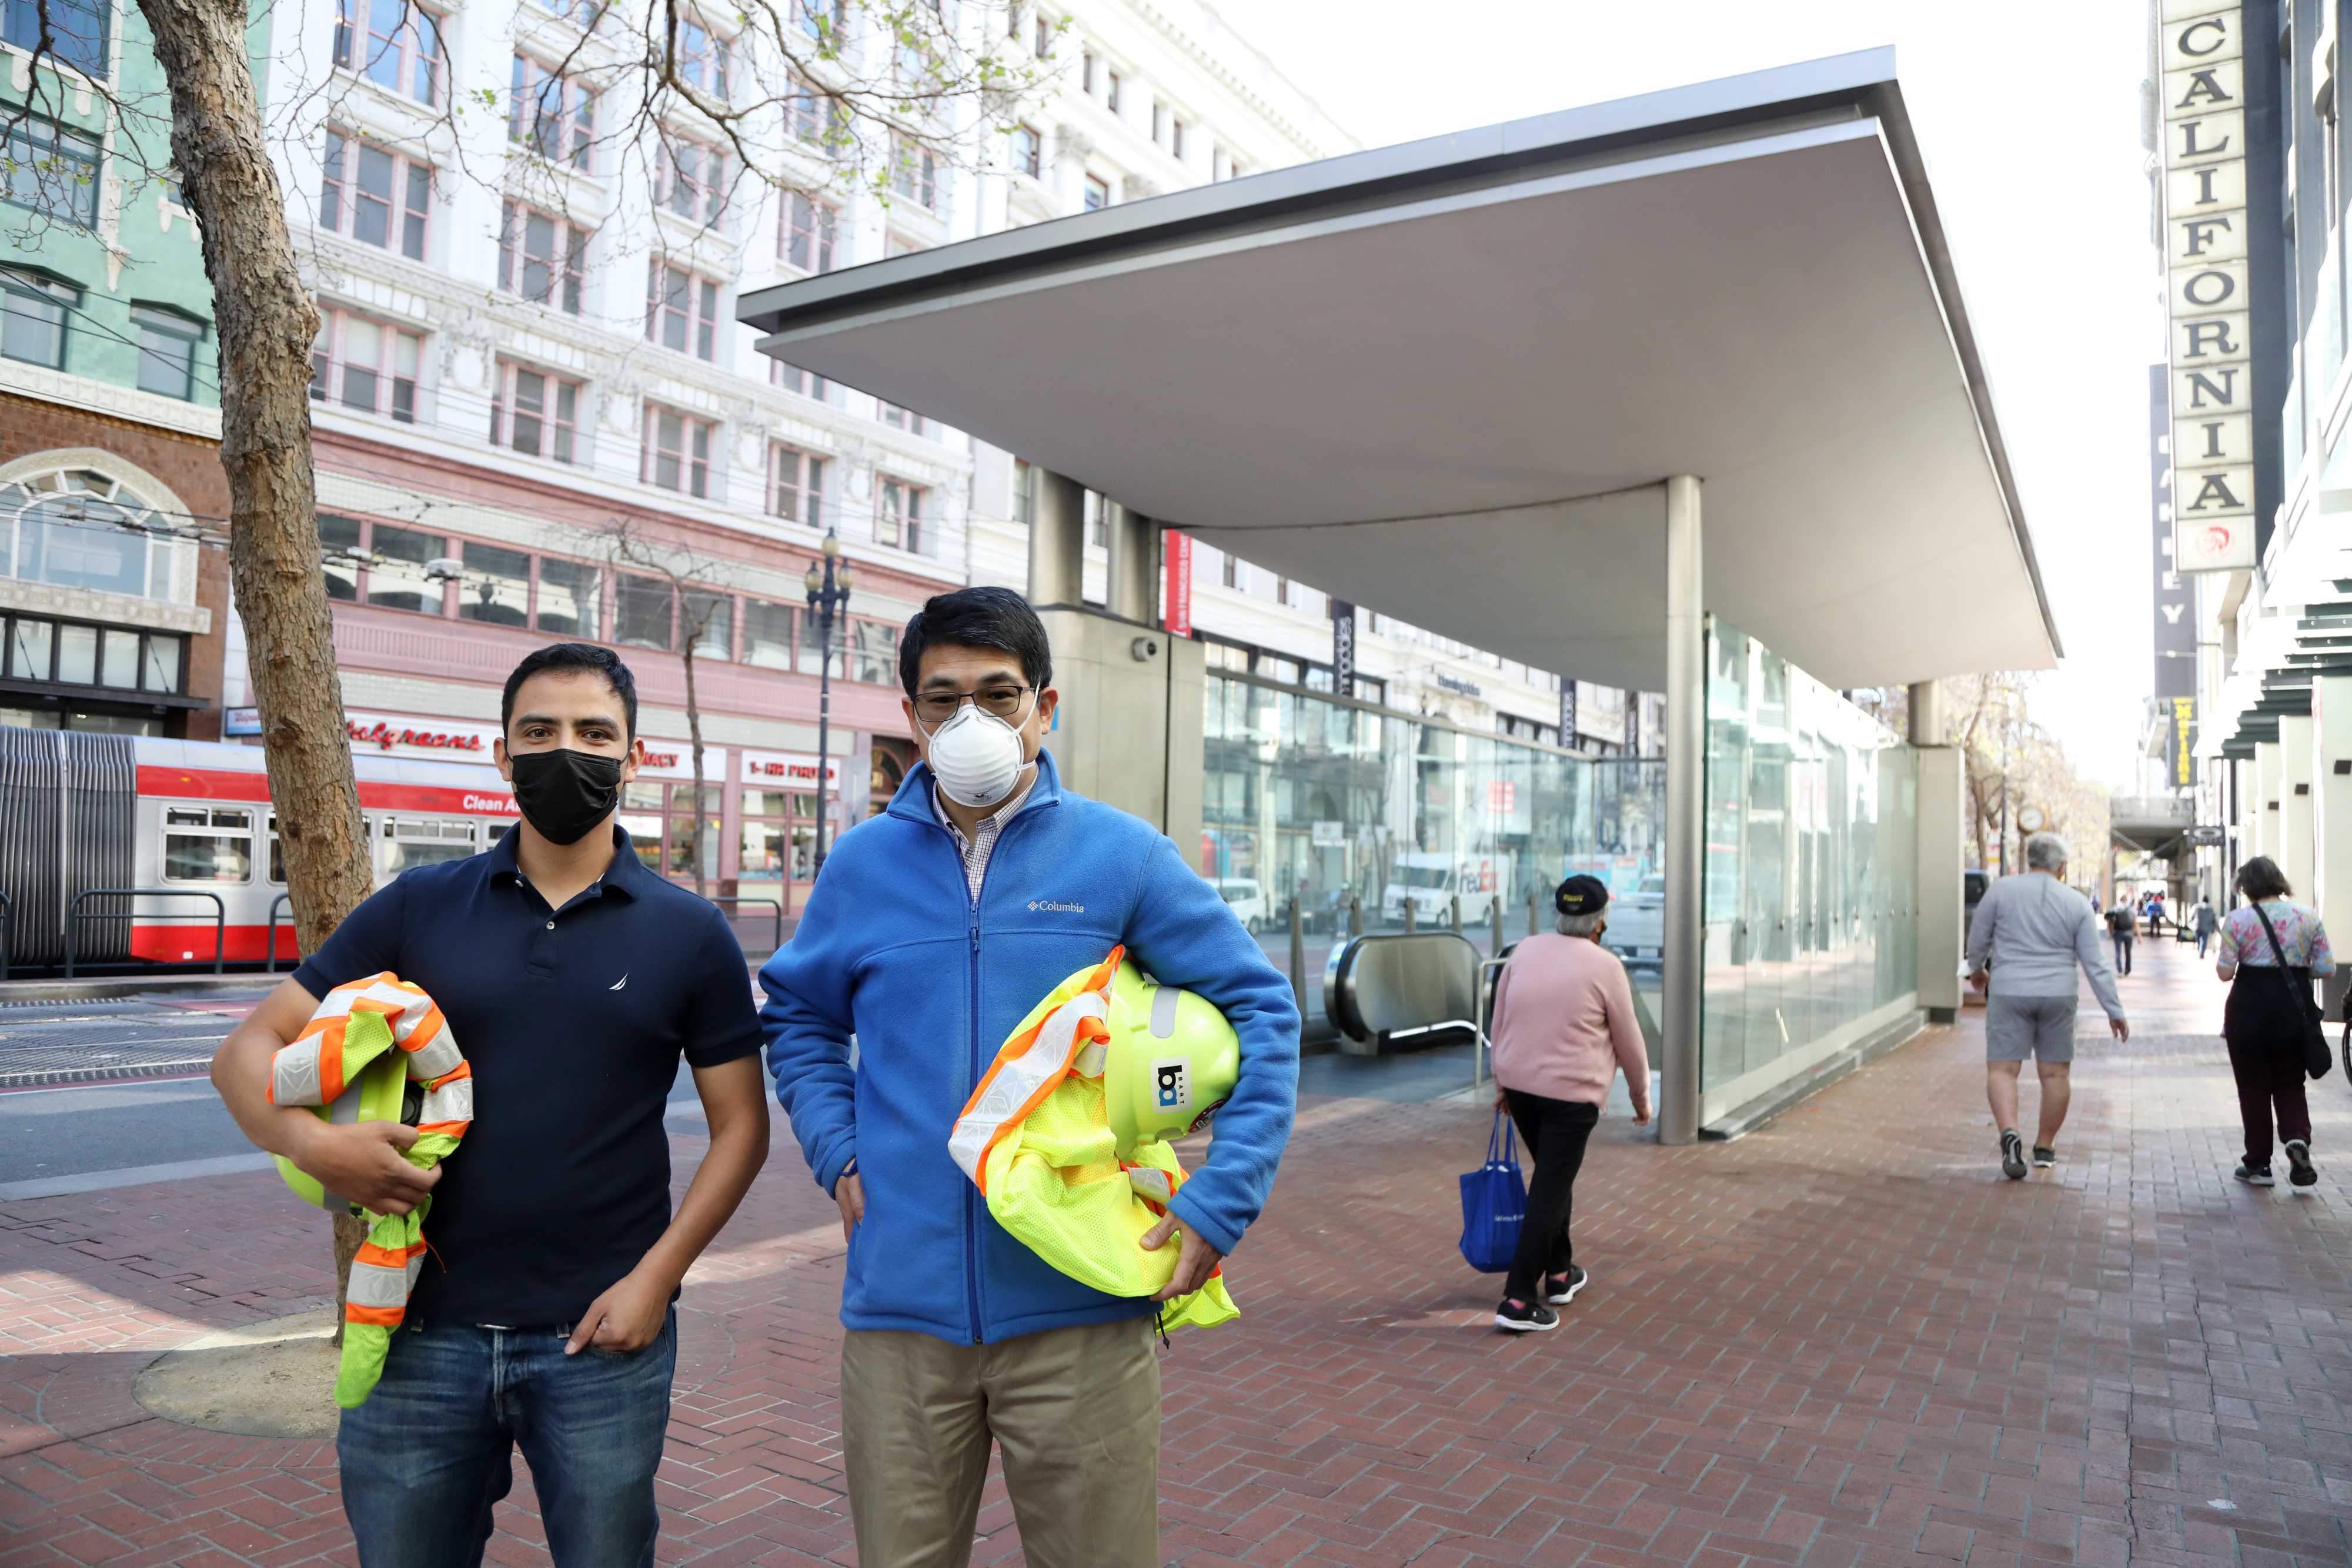 Carlos Rosales, left, and Shihua Nie, right, poses in front of the Powell St. Station canopy